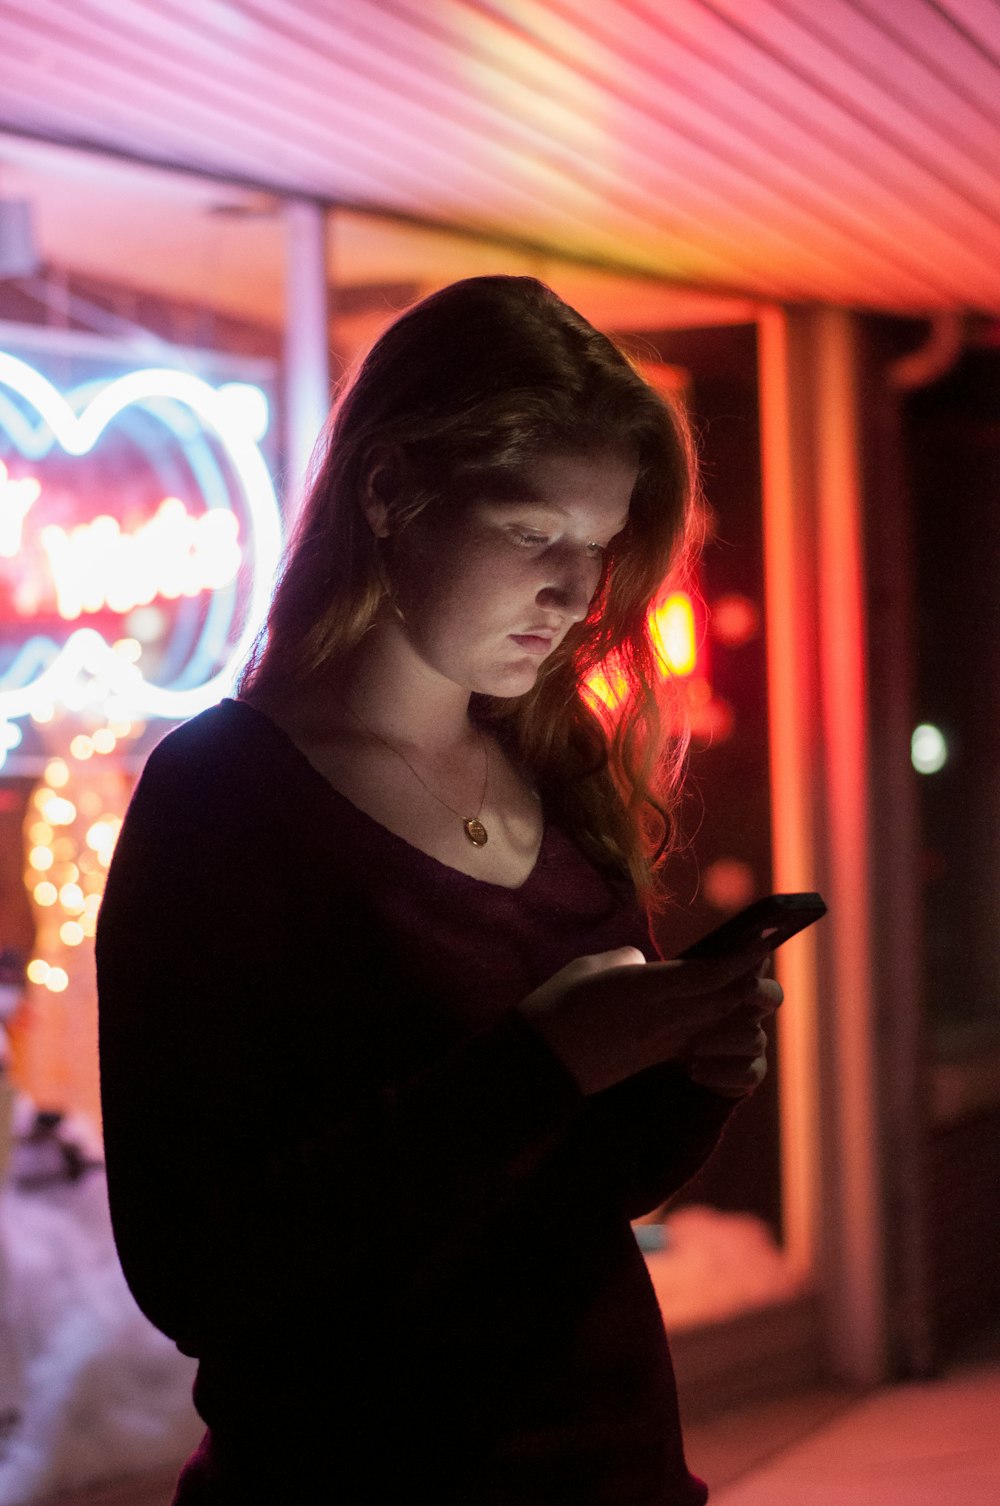 woman using smartphone in front of red and blue lighted glass store